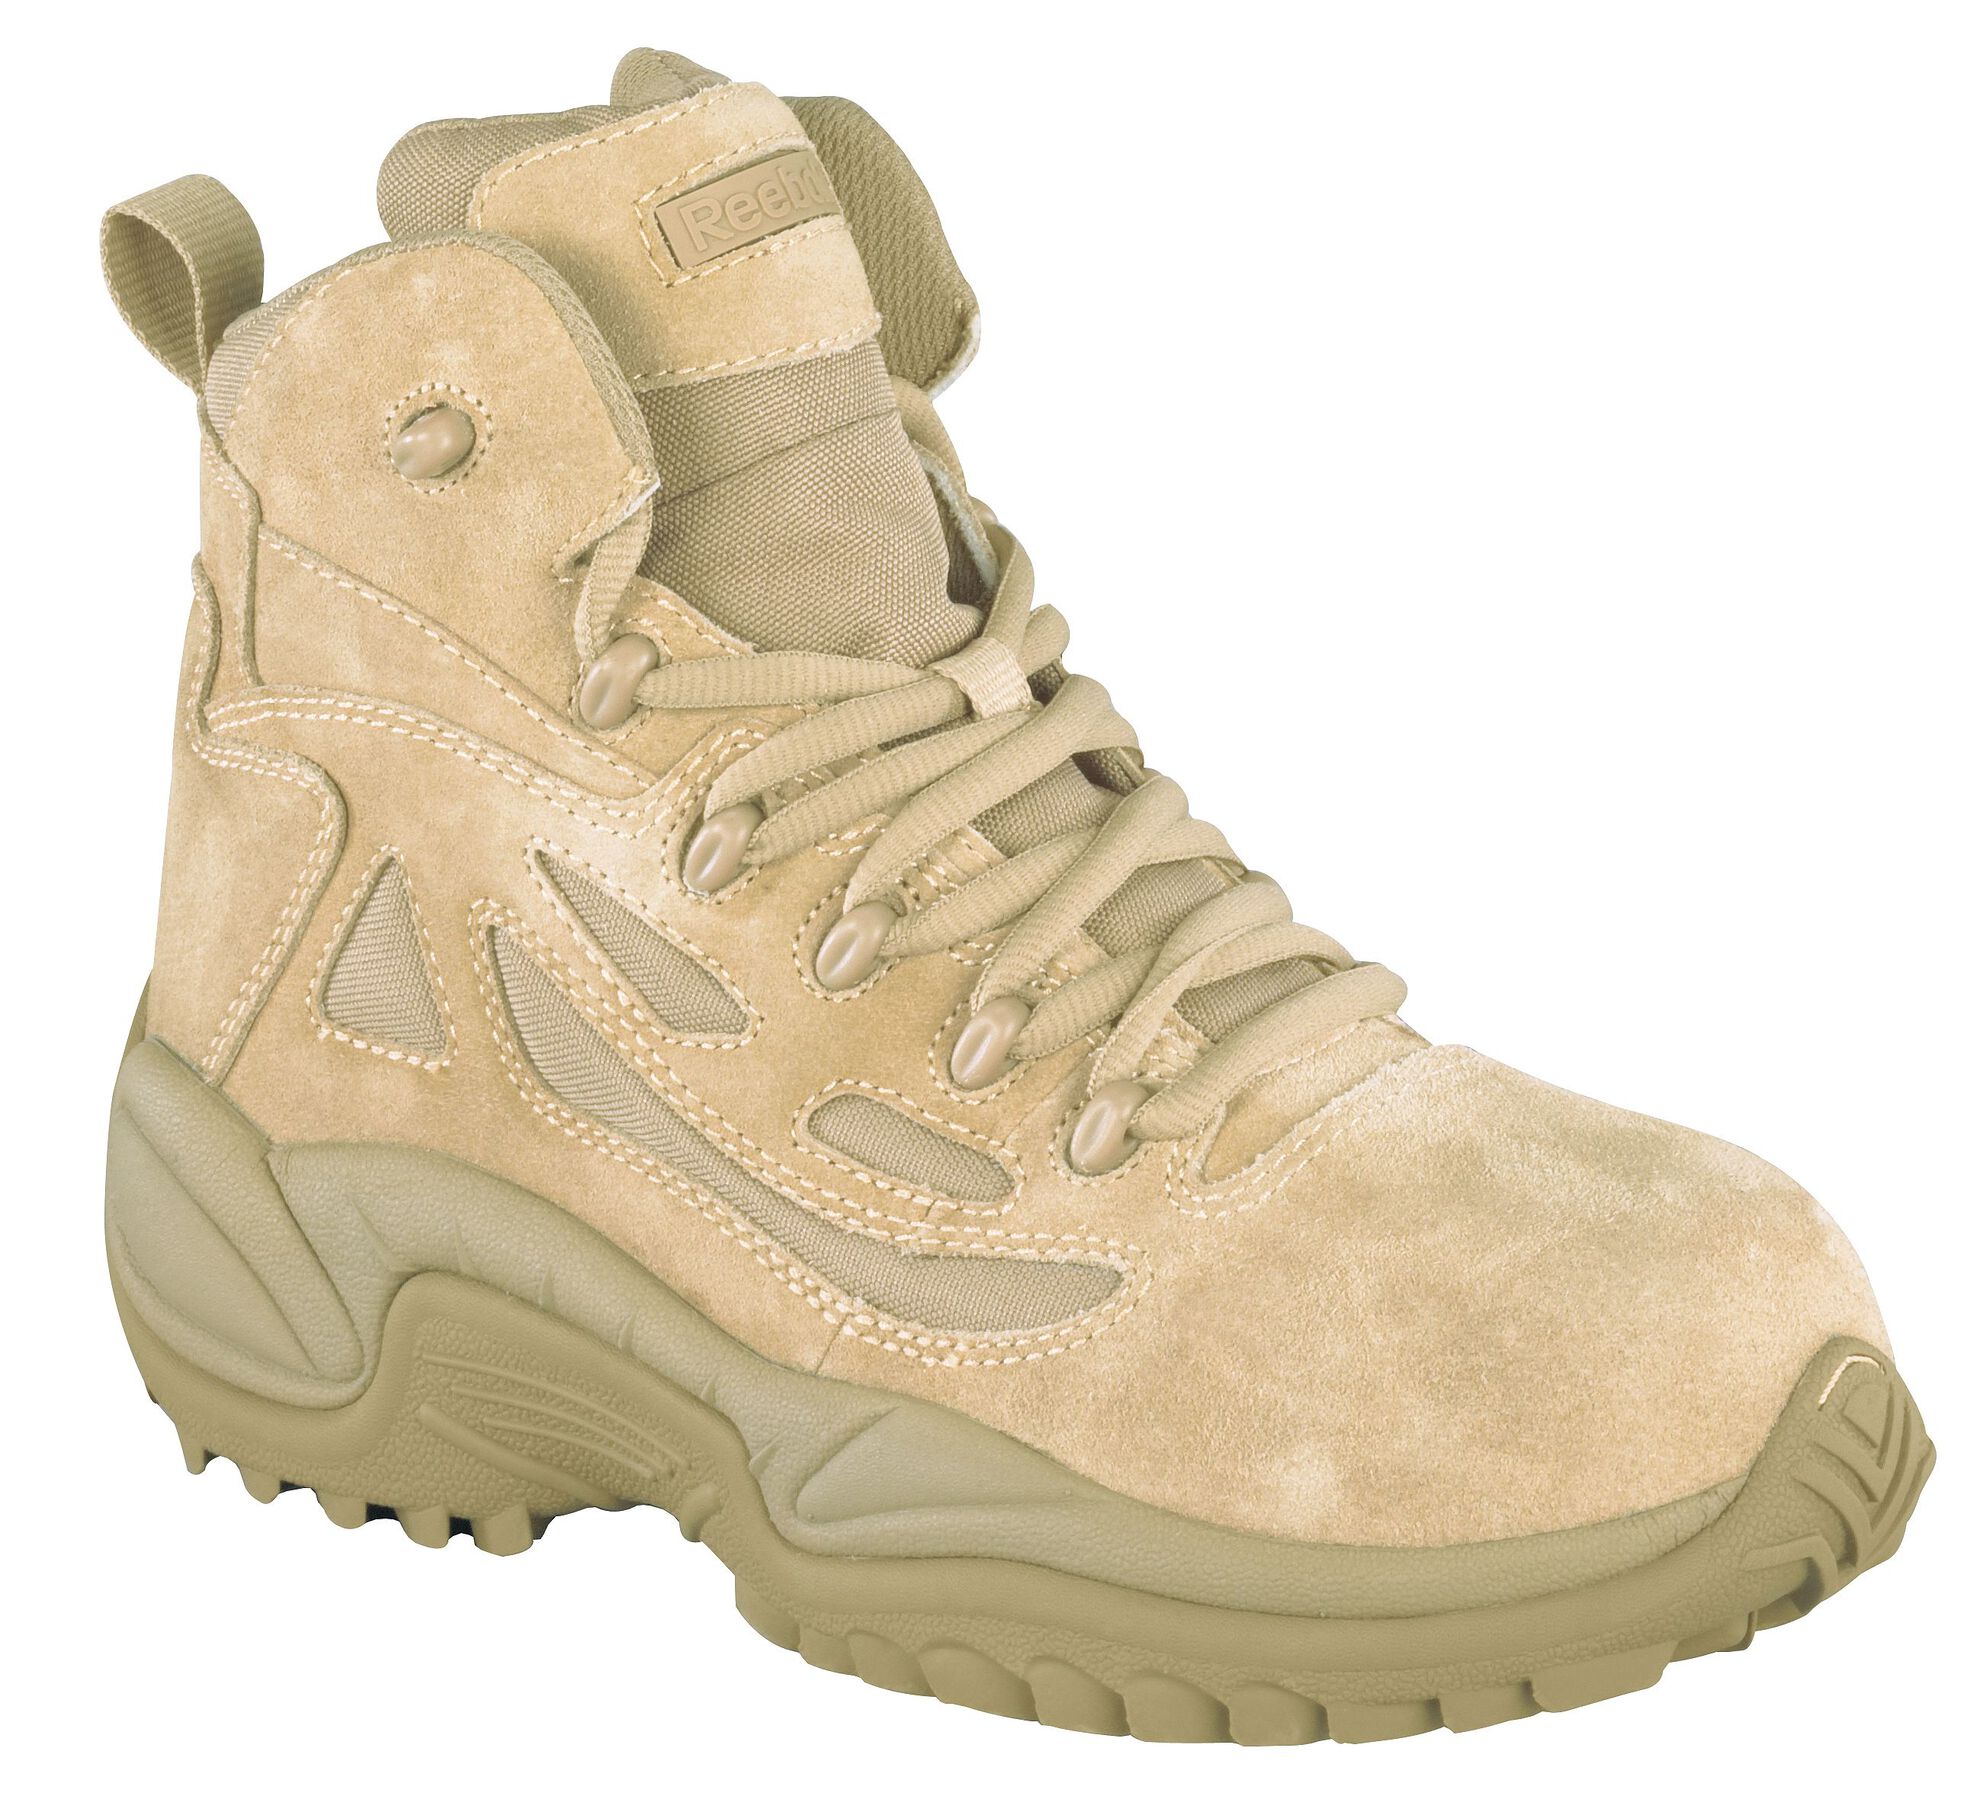 Reebok Men's Stealth Lace-Up with Side-Zip Tactical Work Boots - Composite Toe - Country Outfitter